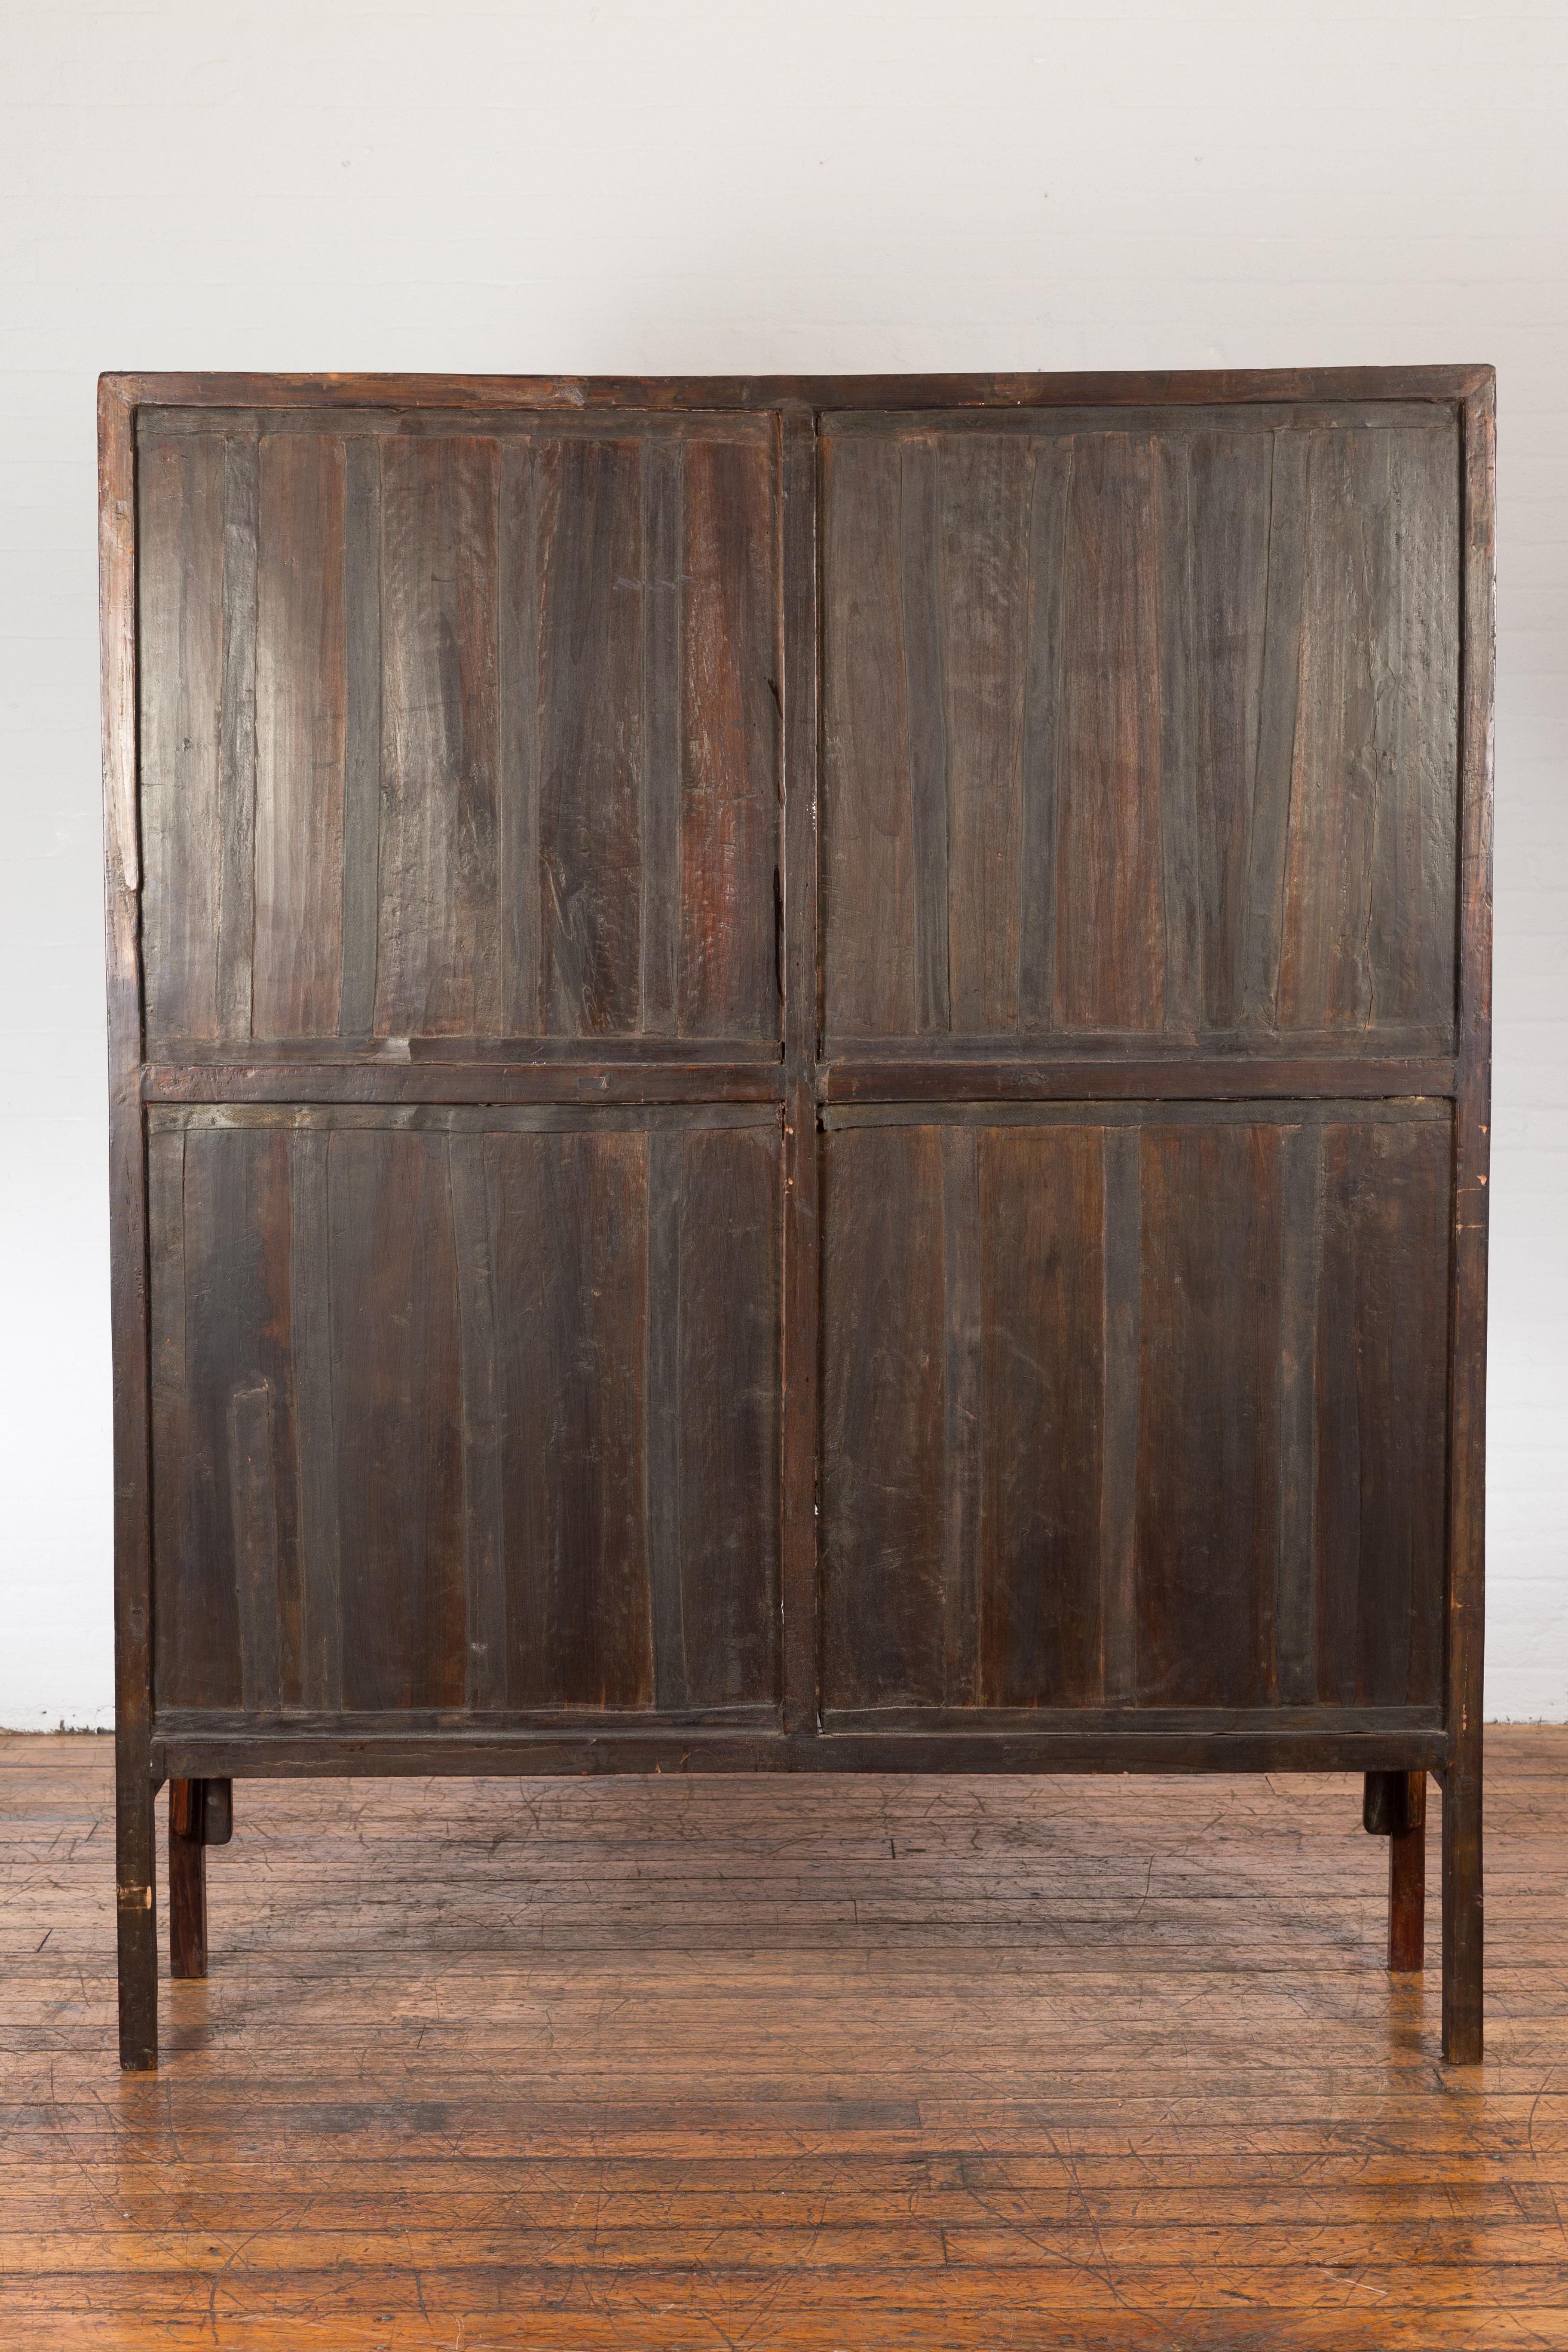 Chinese Qing Dynasty 19th Century Bookcase with Four Shelves and Dark Patina For Sale 7